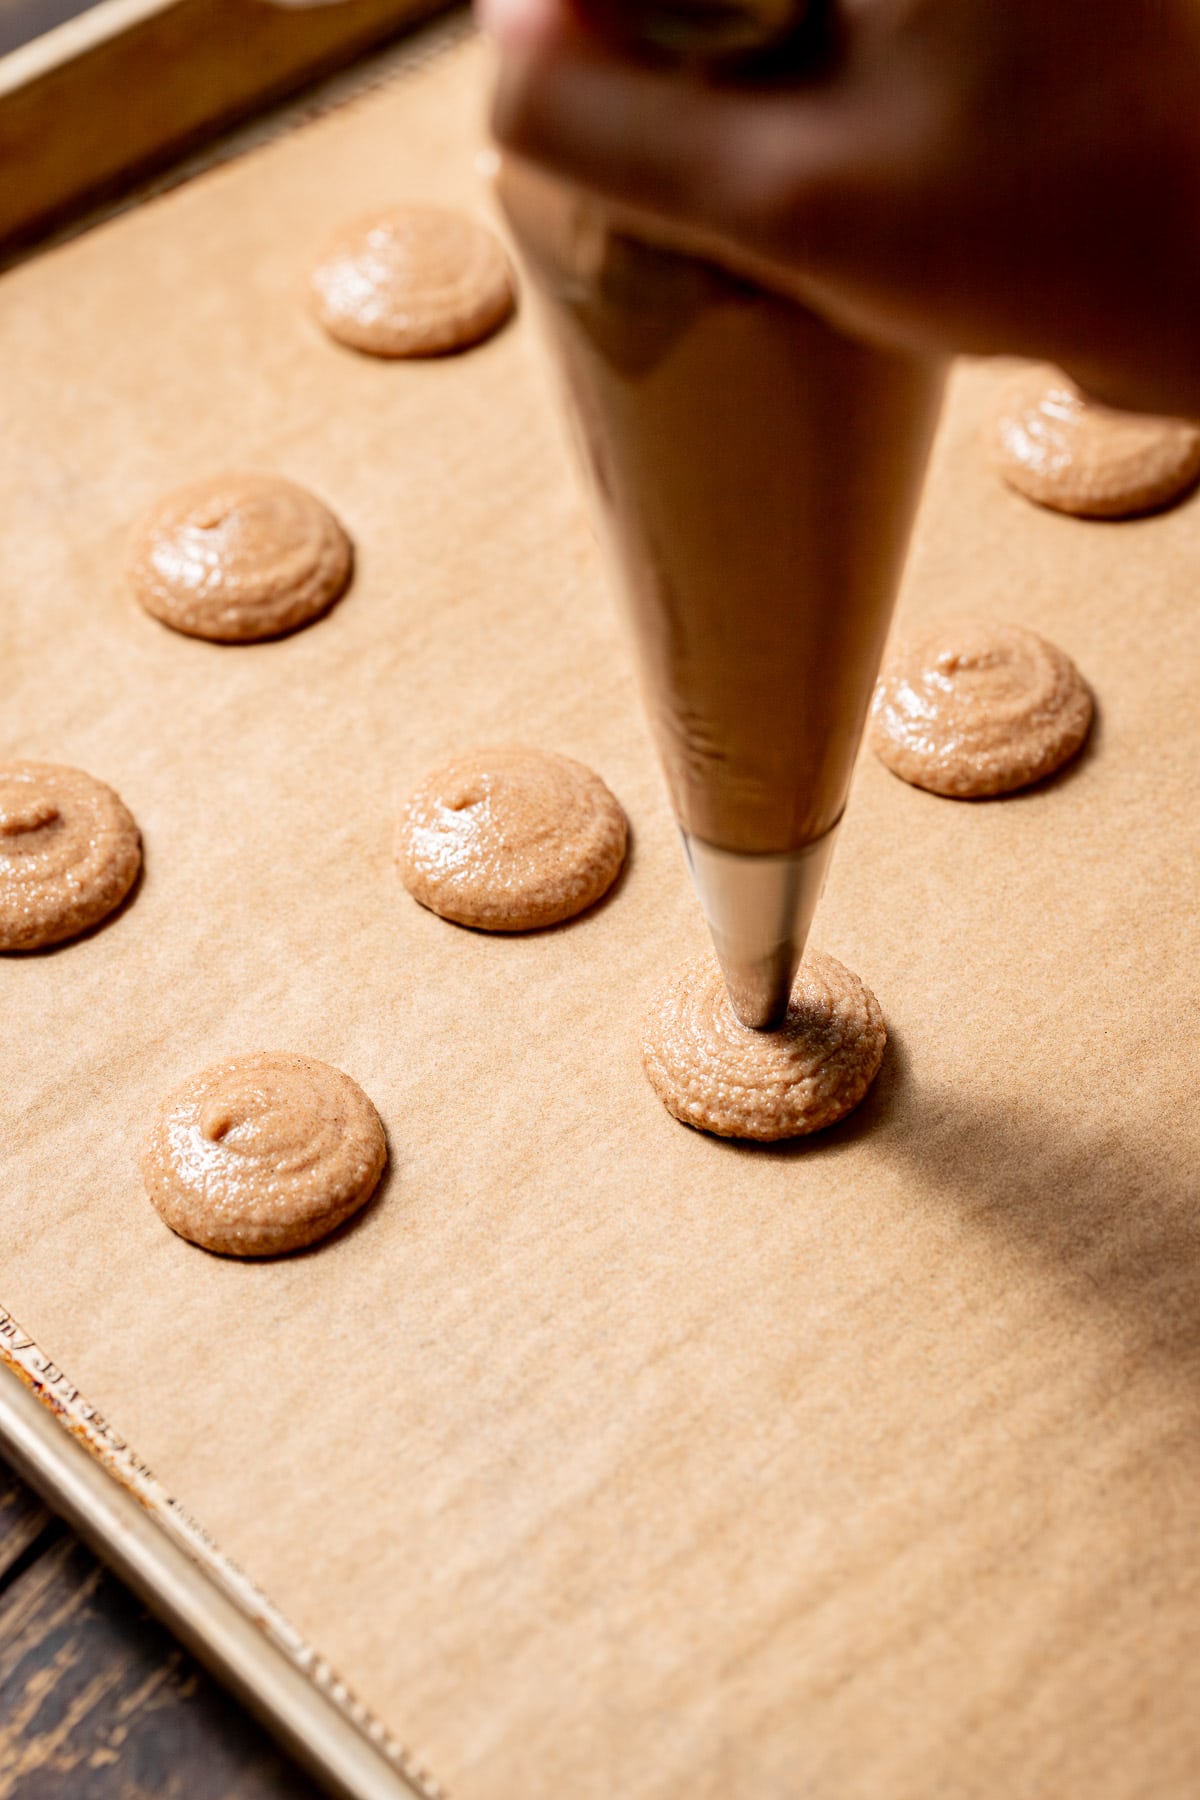 macaron batter being piped onto baking tray.